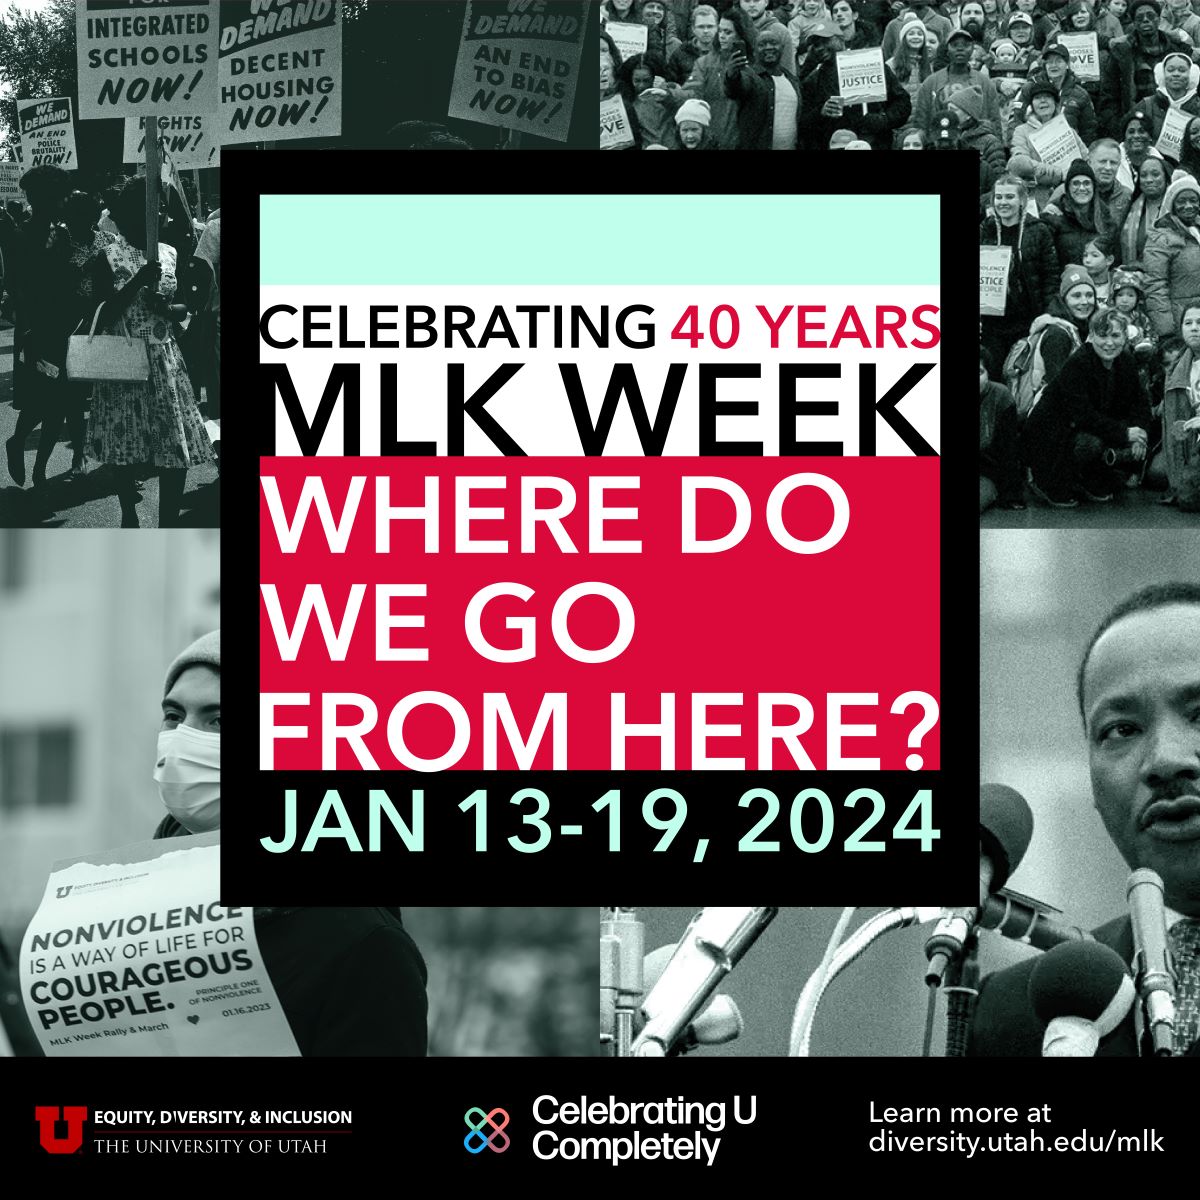 Celebrating 40 Years of MLK Week, Where do we go from here? January 13-19, 2024